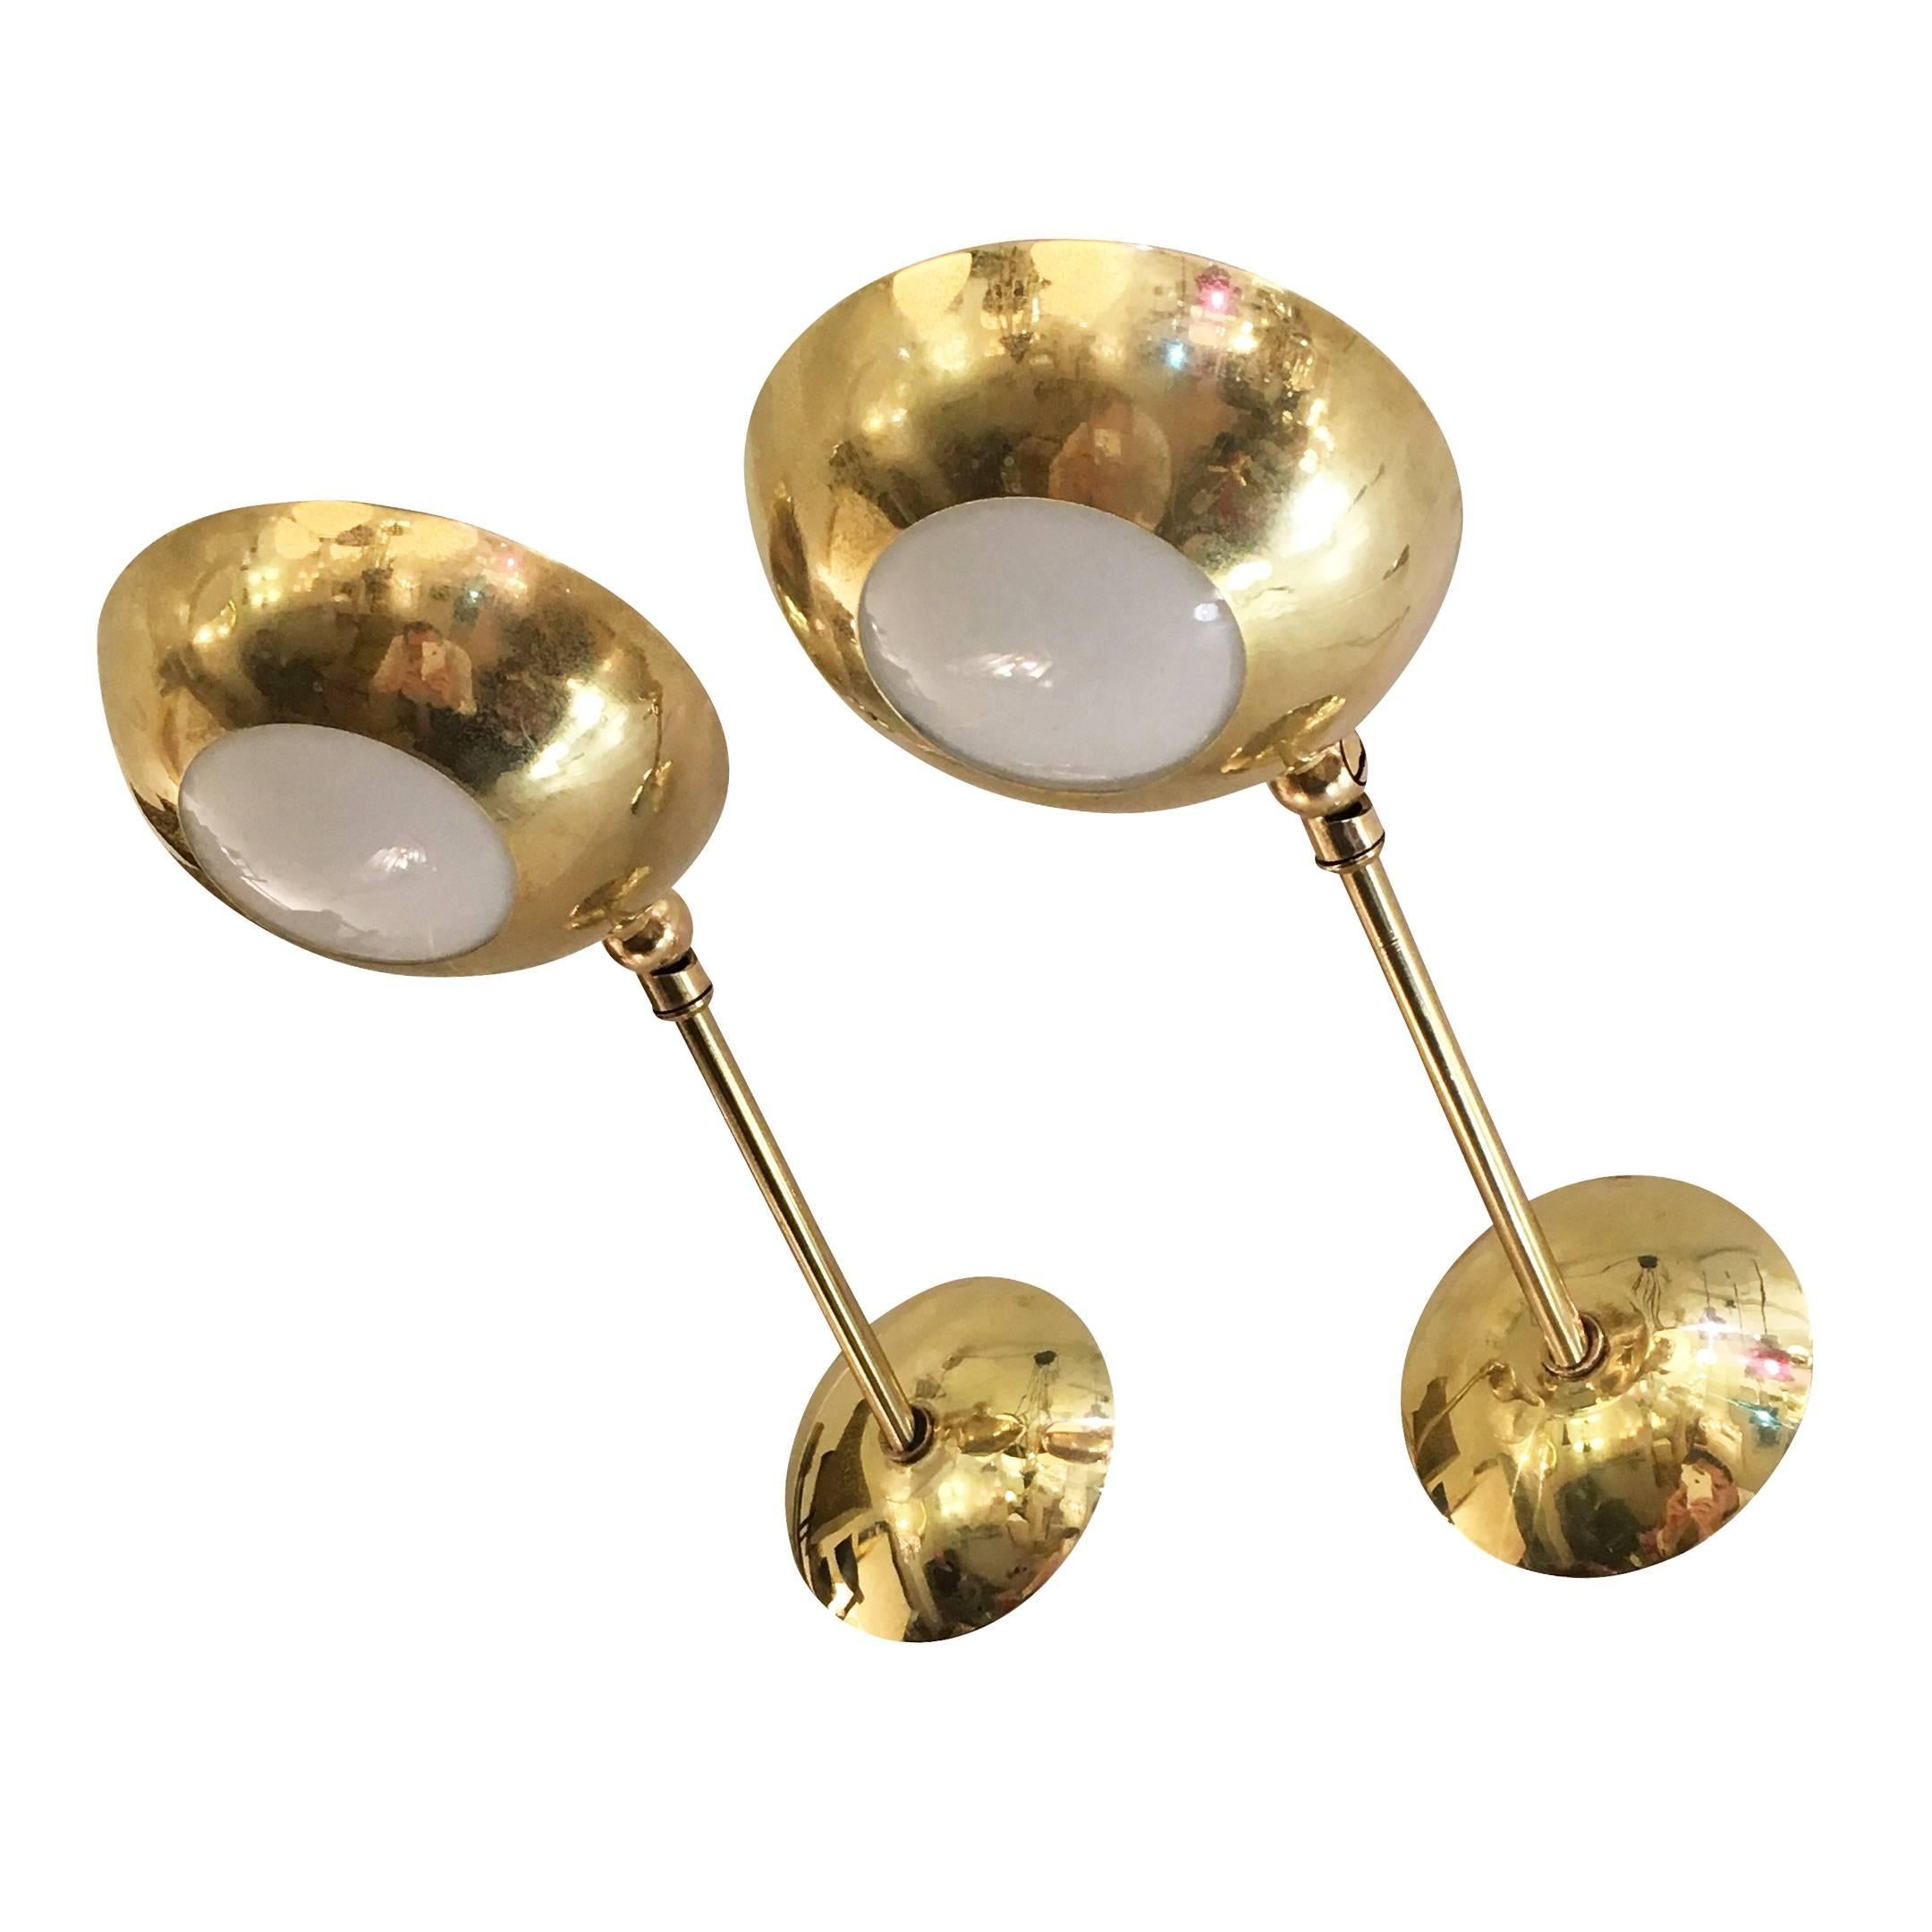 Elegant pair of brass sconces in the manner of Stilnovo. The shades have a frosted glass center and are adjustable 180 degrees. Each holds one candelabra socket.

Measures: Width: 4.5".

Depth: Approximate 7"-10" depending on shade